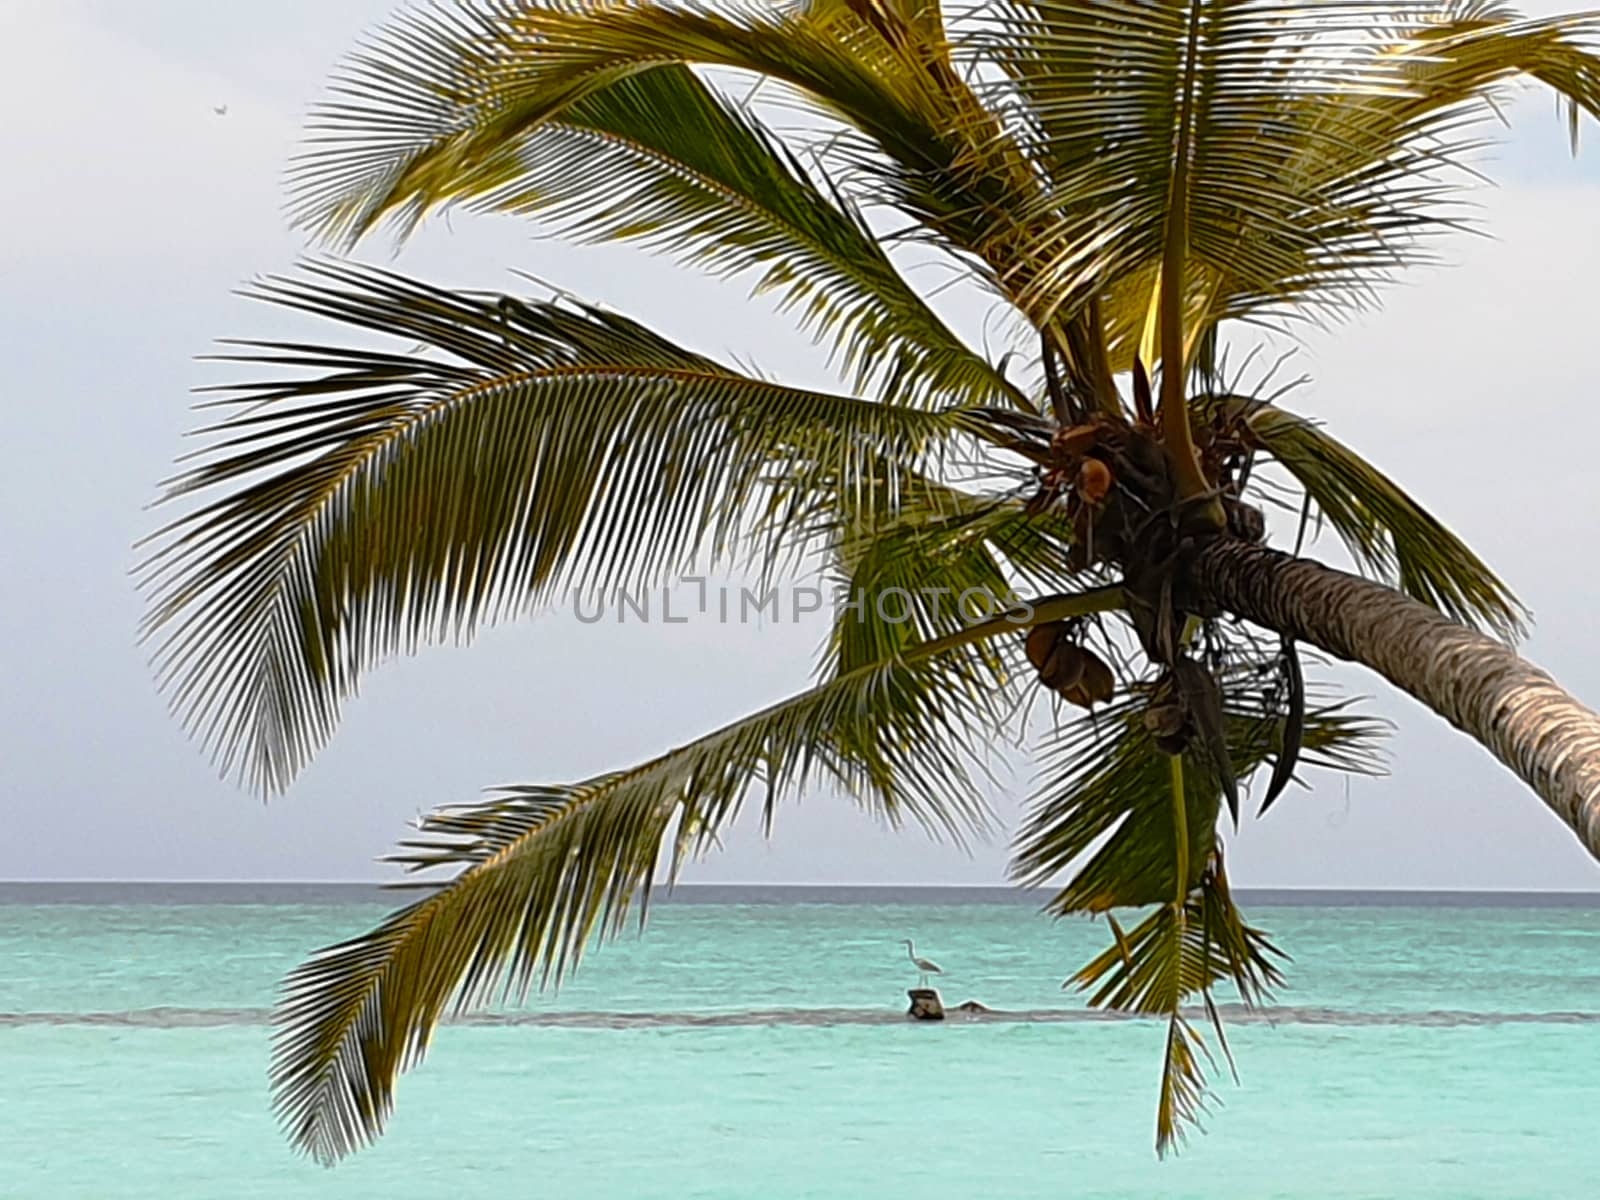 Maldives. Tropical trees on the shore of the blue ocean. by mdsfotograf